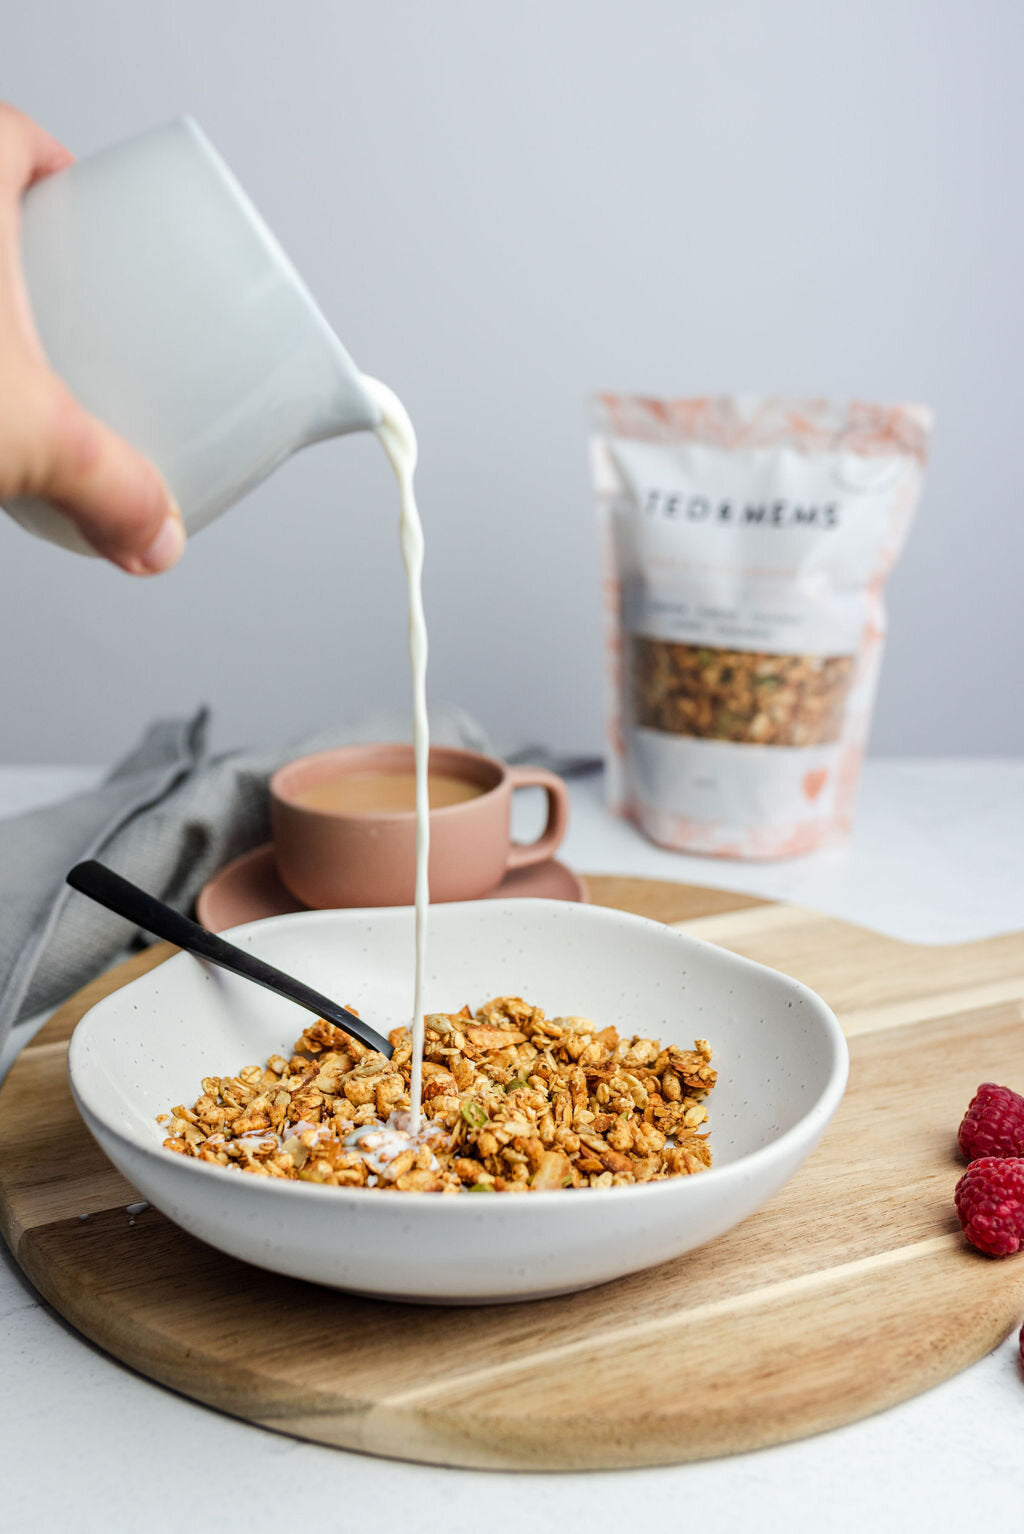 Ted & Mems Nut & Seed Granola 300g